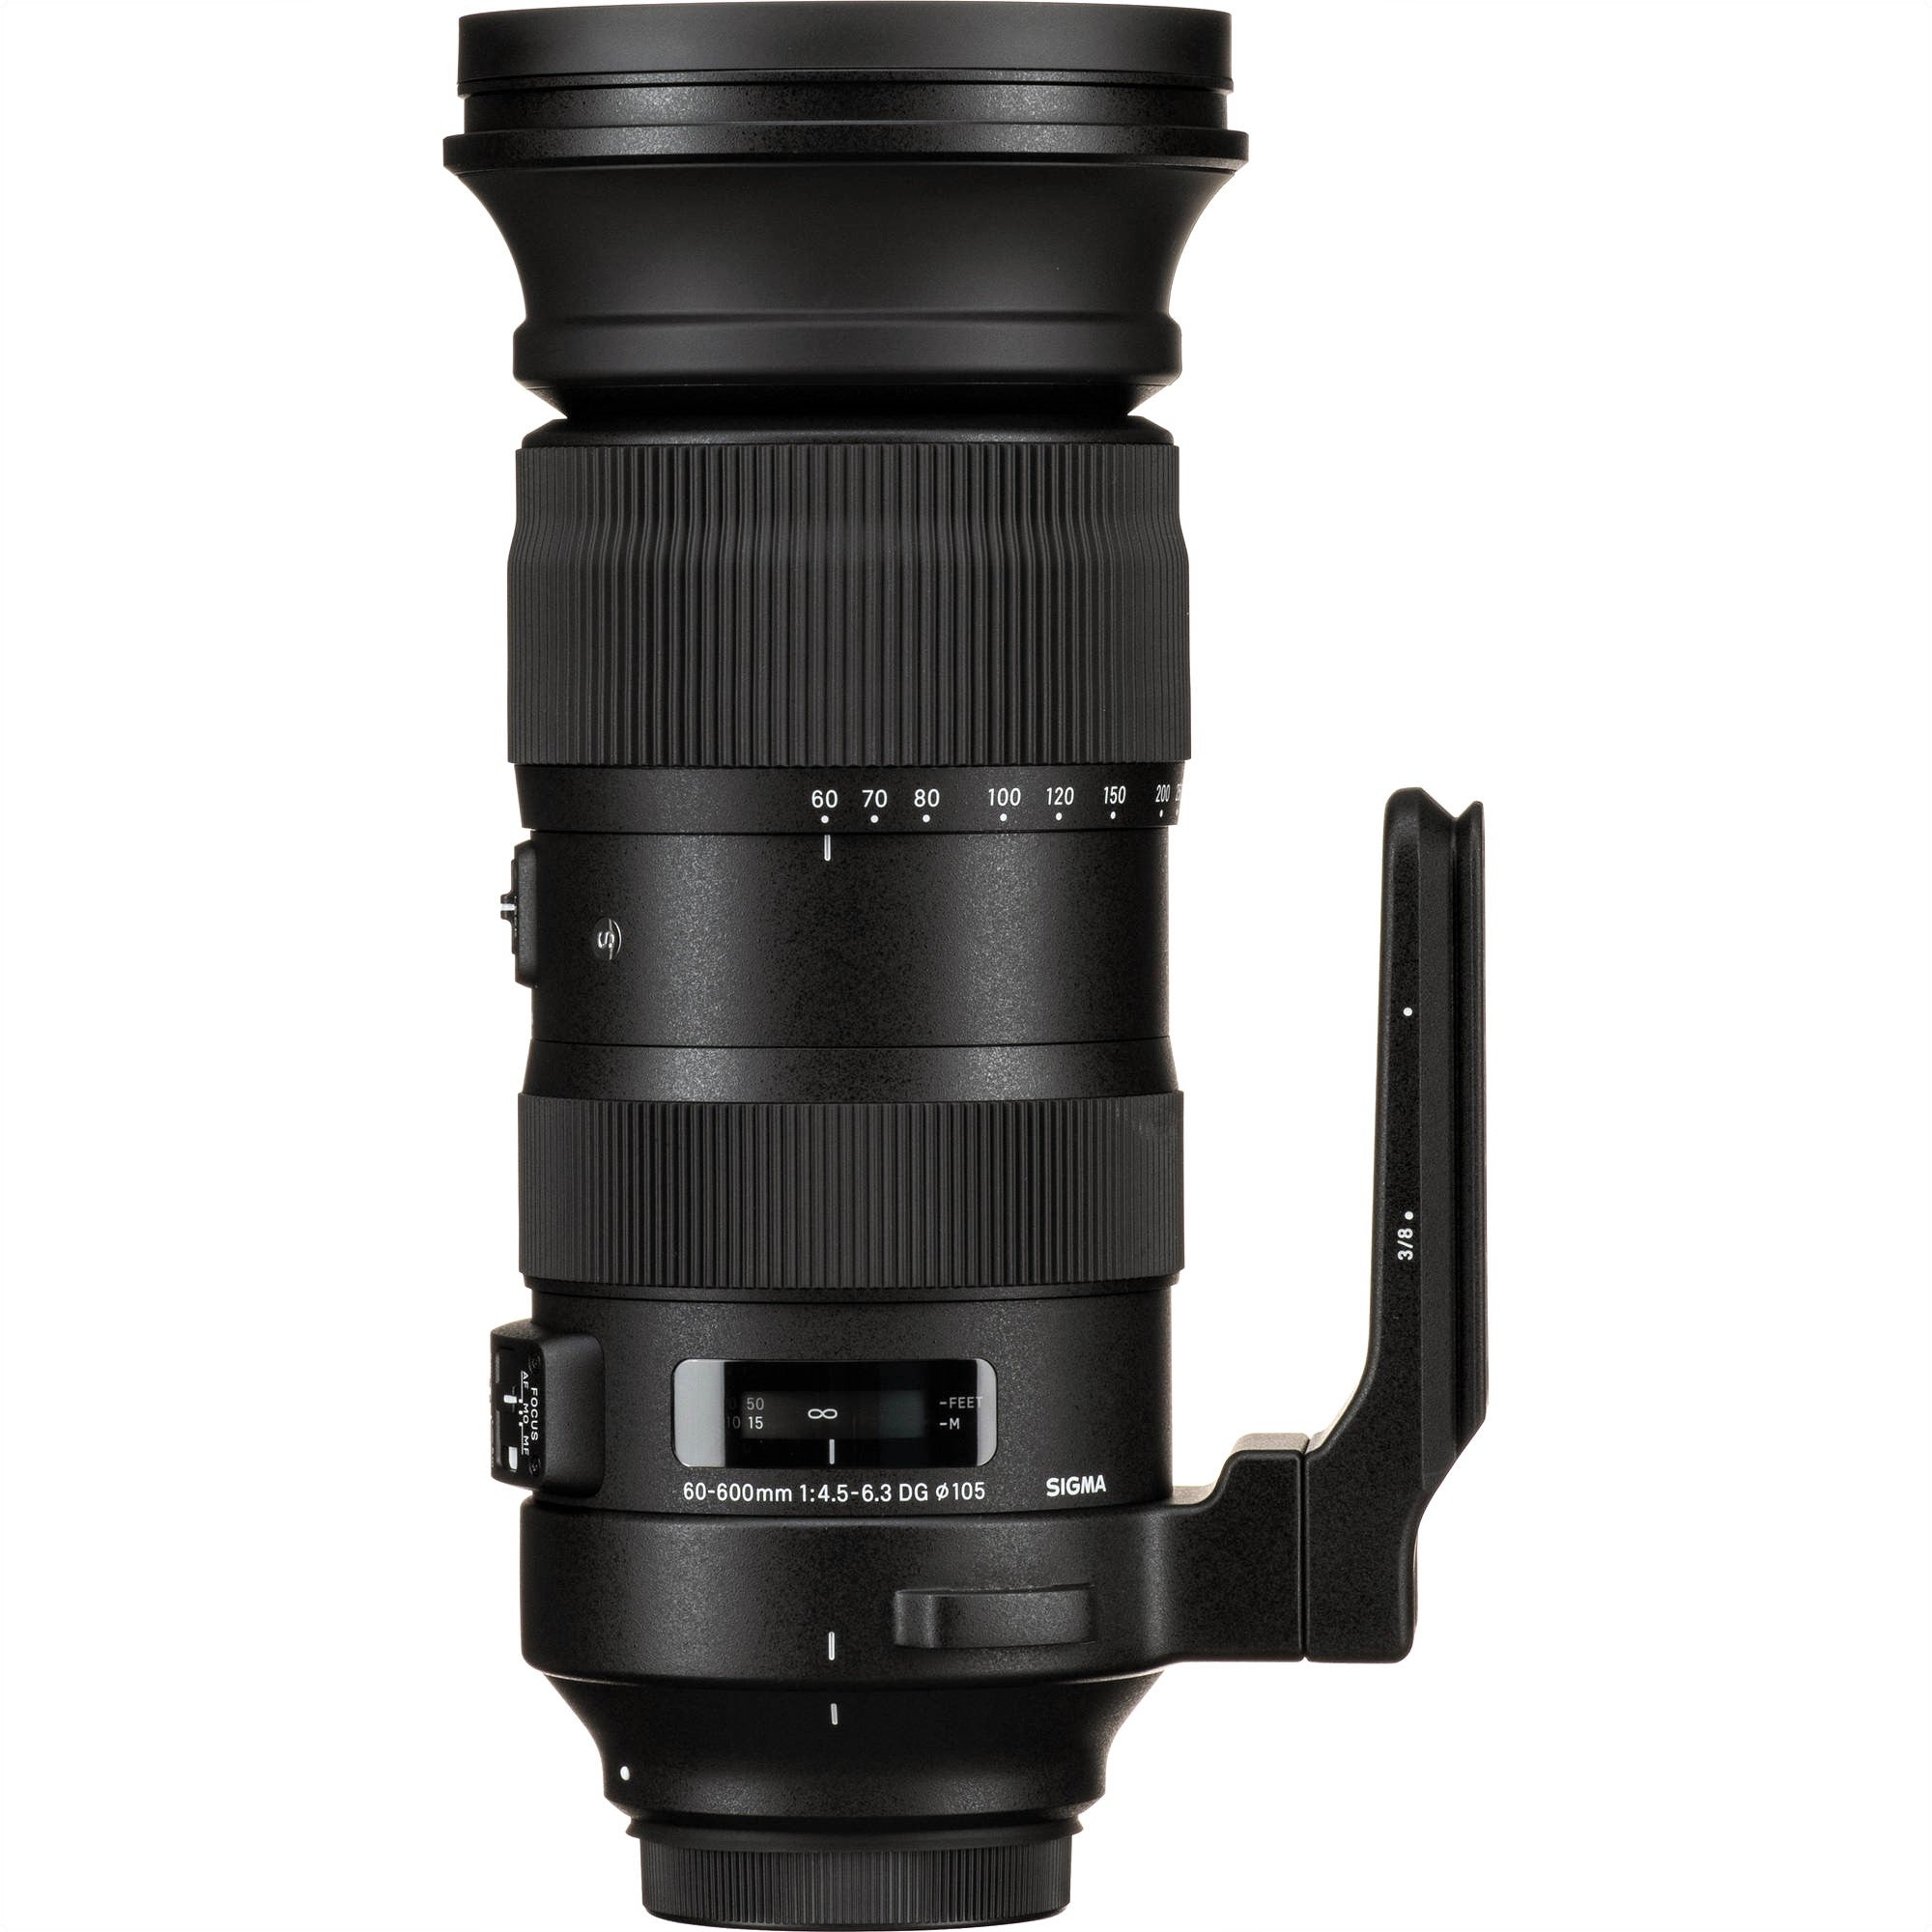 Sigma 60-600mm F4.5-6.3 DG OS HSM Sports Lens for Canon EF with Attached Tripod Mount on the Right